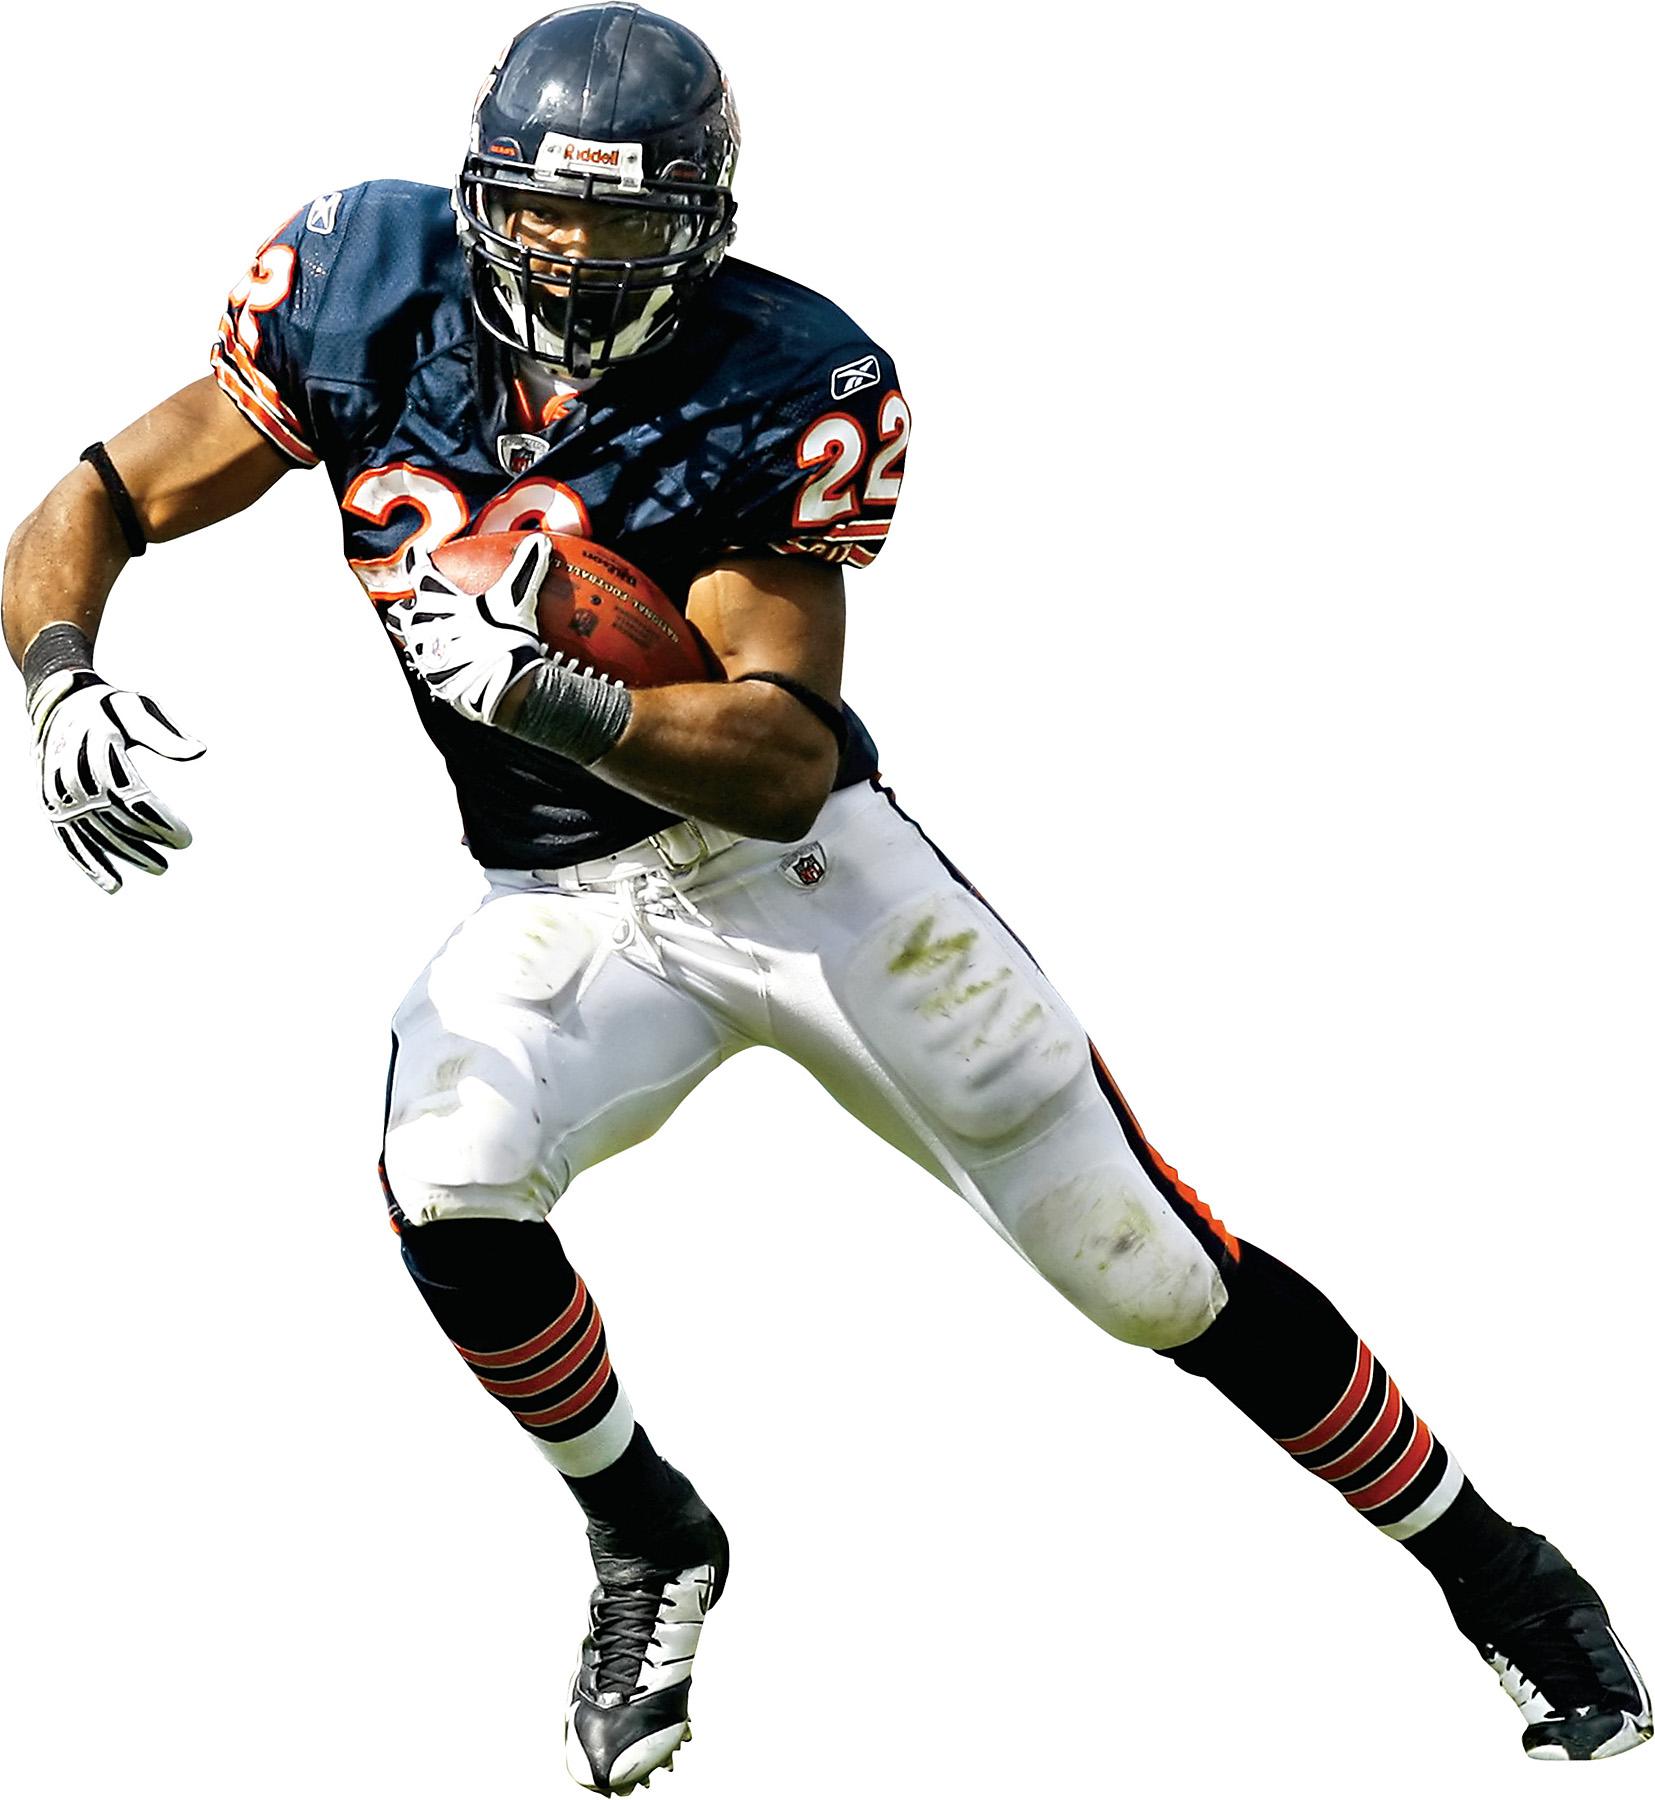 Fathead Wallpaper 2017 2018 Best Cars Reviews Hd Wallpapers - Chicago Bears Players Png - HD Wallpaper 